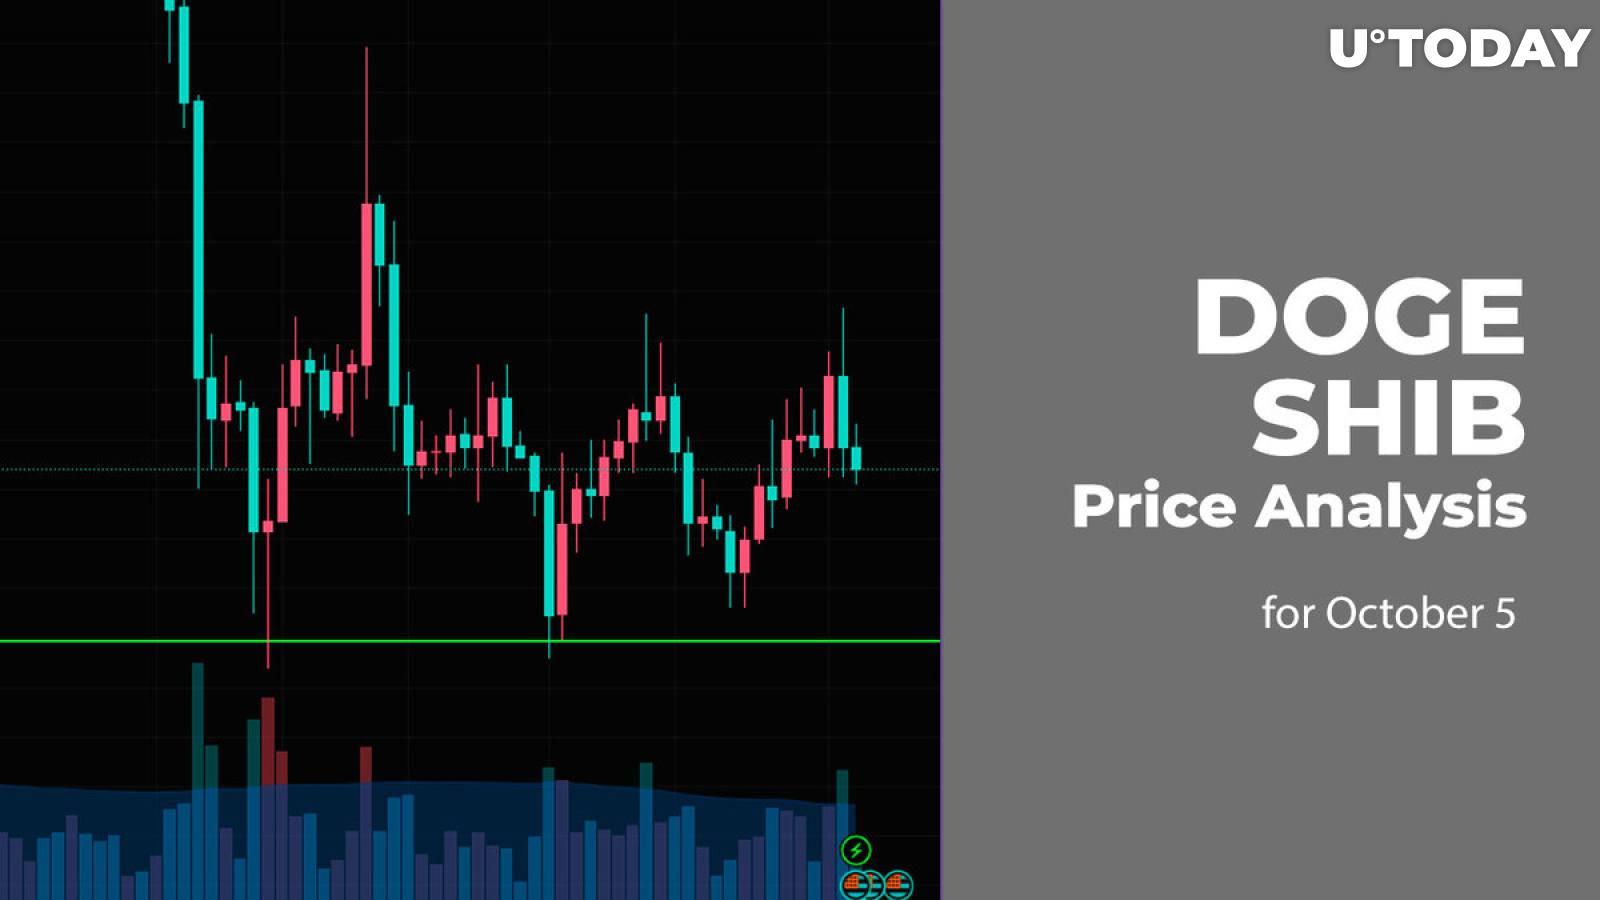 DOGE and SHIB Price Analysis for October 5